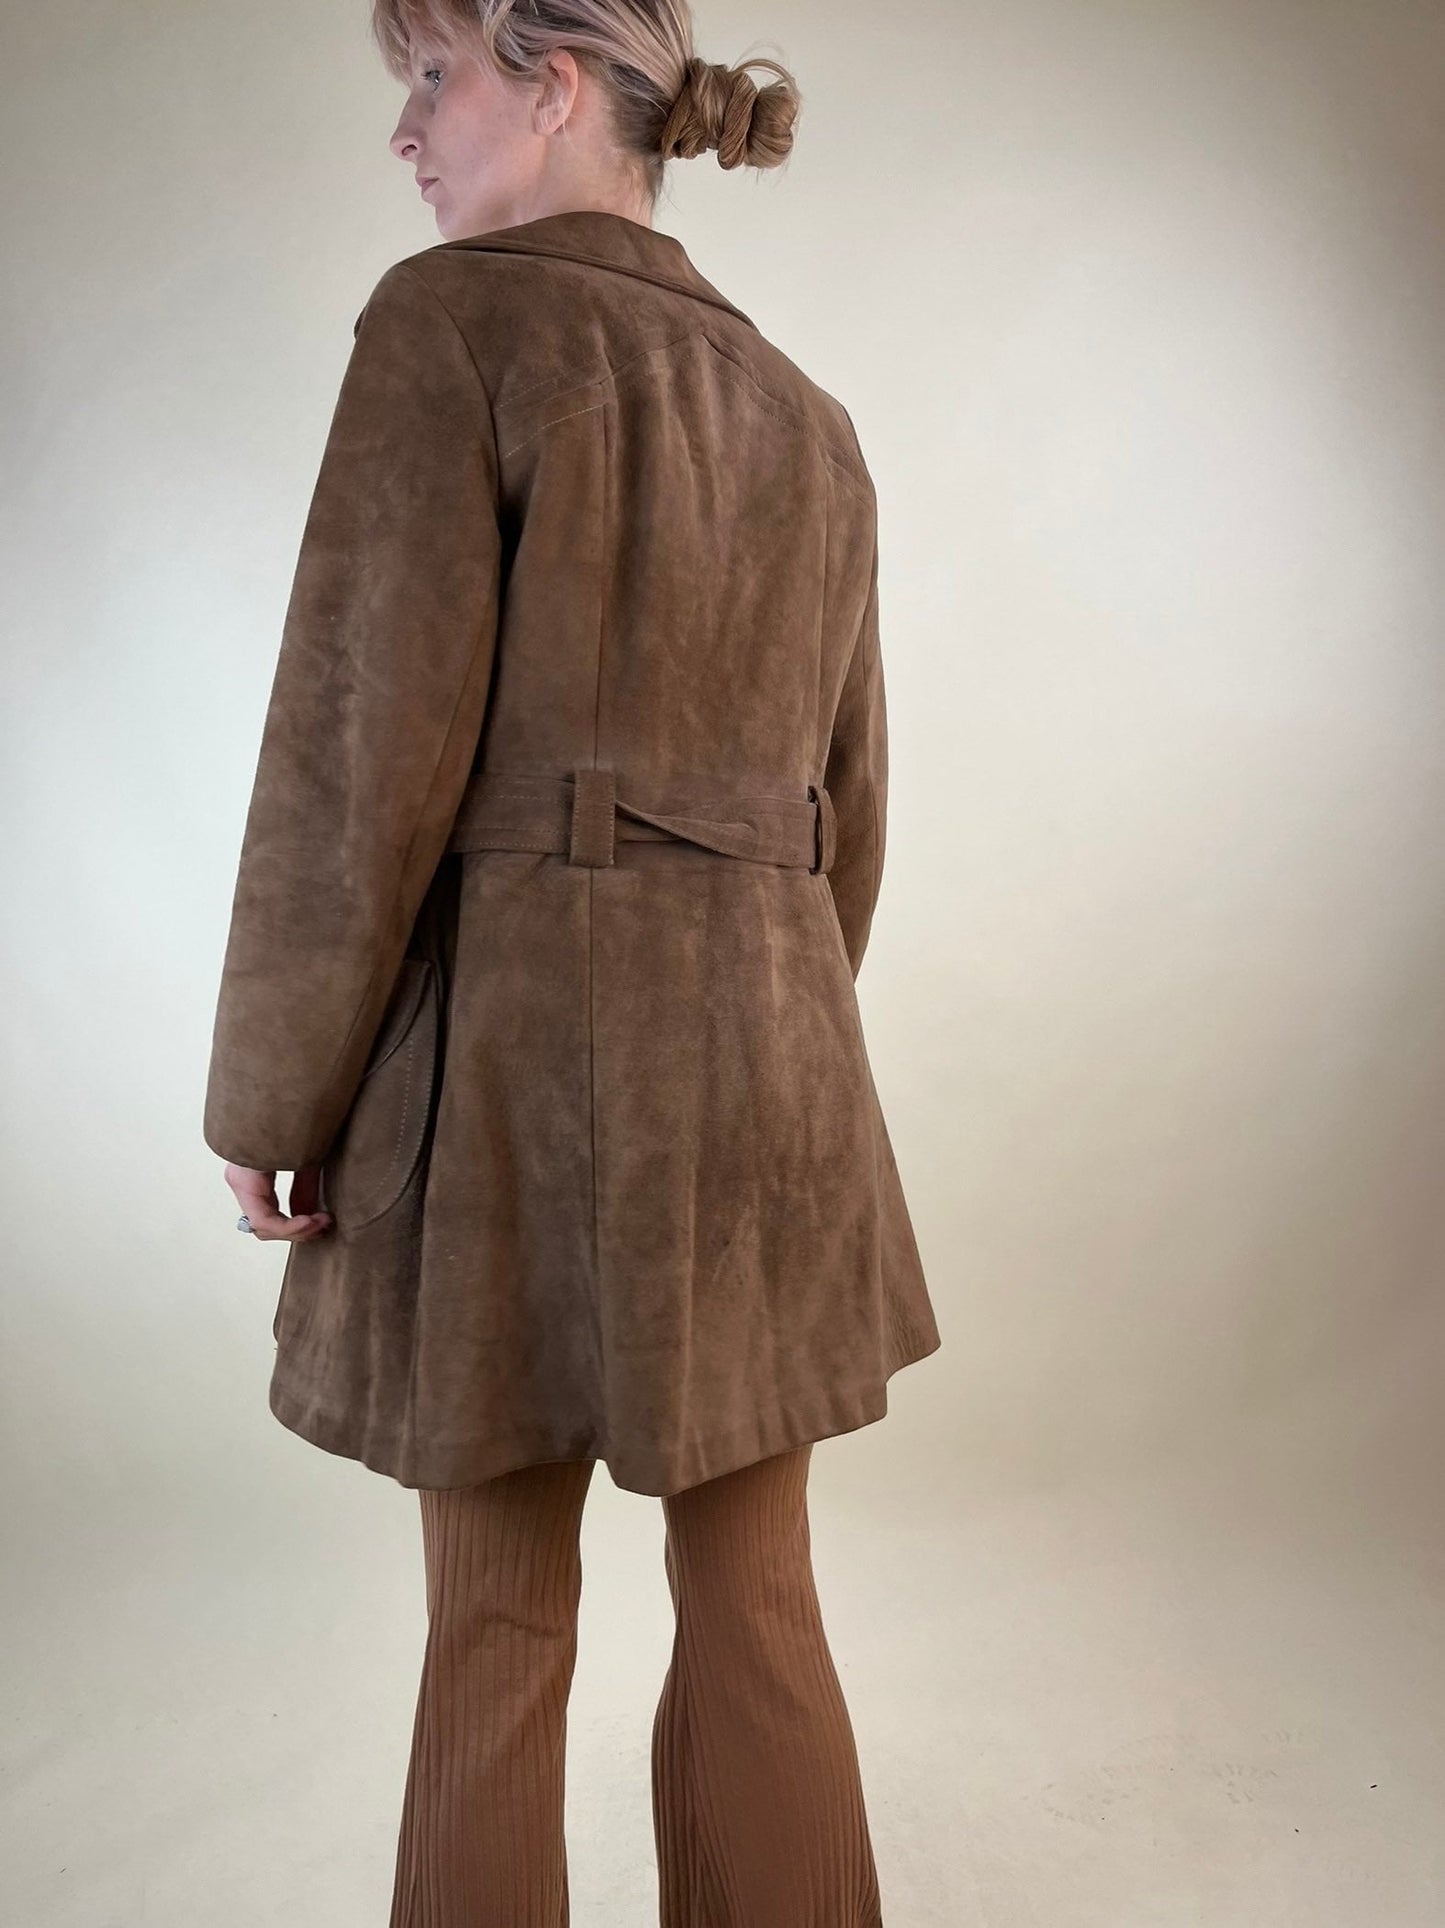 70s Brown Soft Suede Leather Jacket / Vintage Half Trench / Small